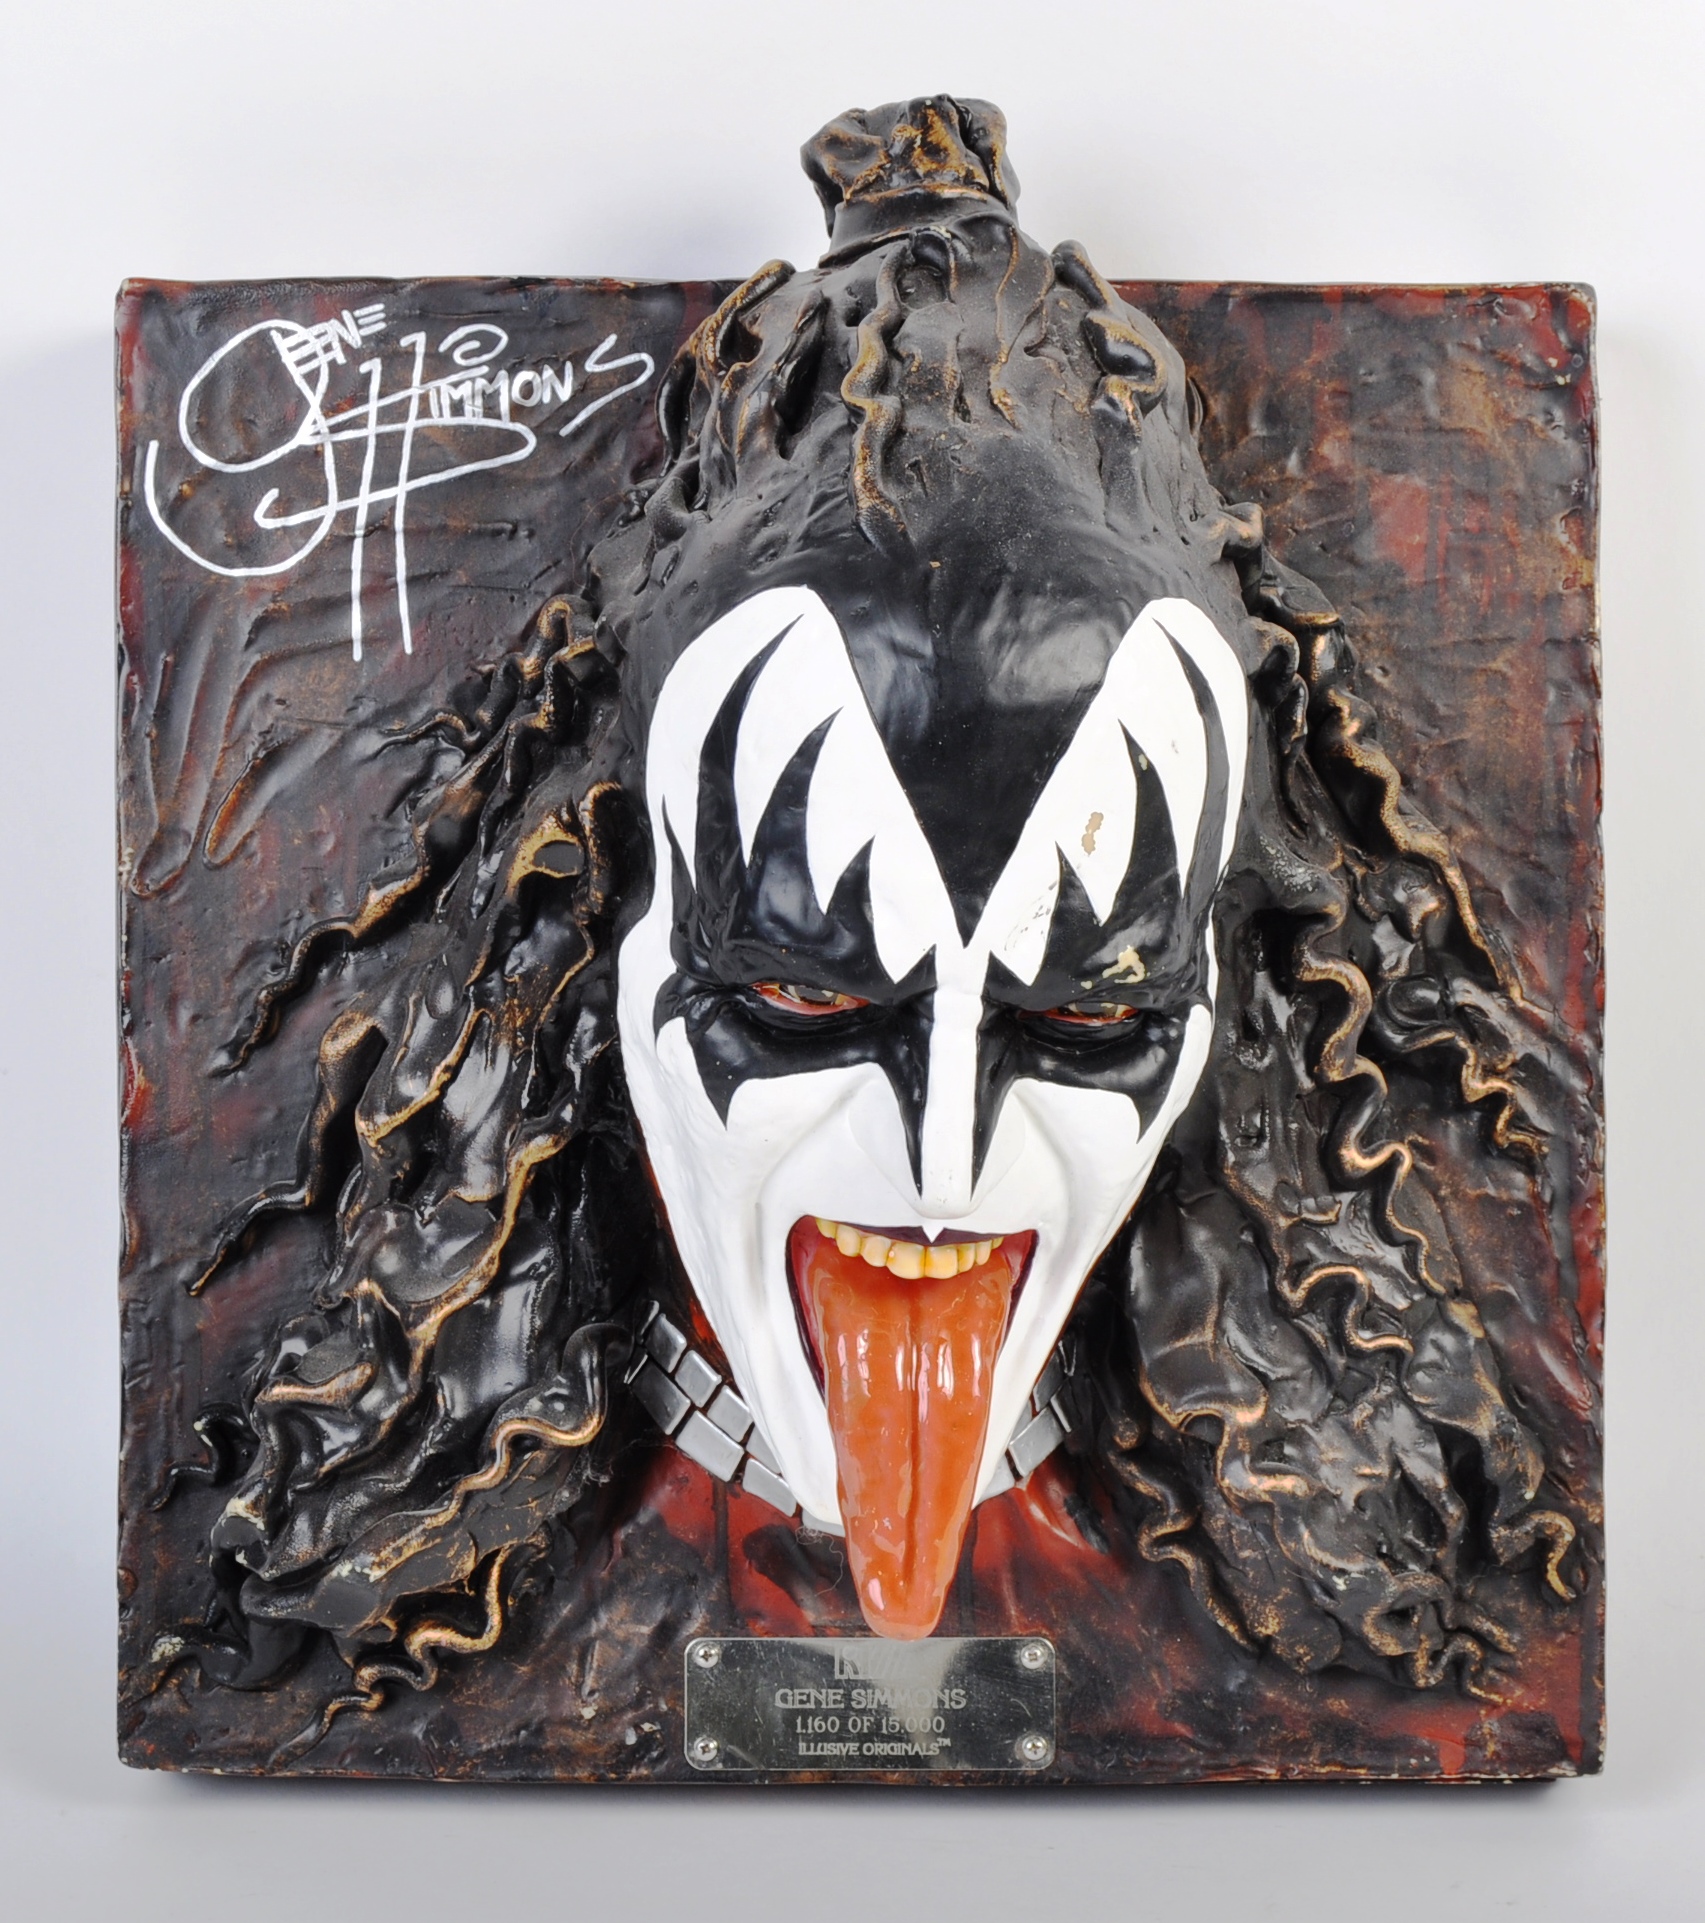 GENE SIMMONS - KISS - LIMITED EDITION CAST RESIN 3D WALL PLAQUE